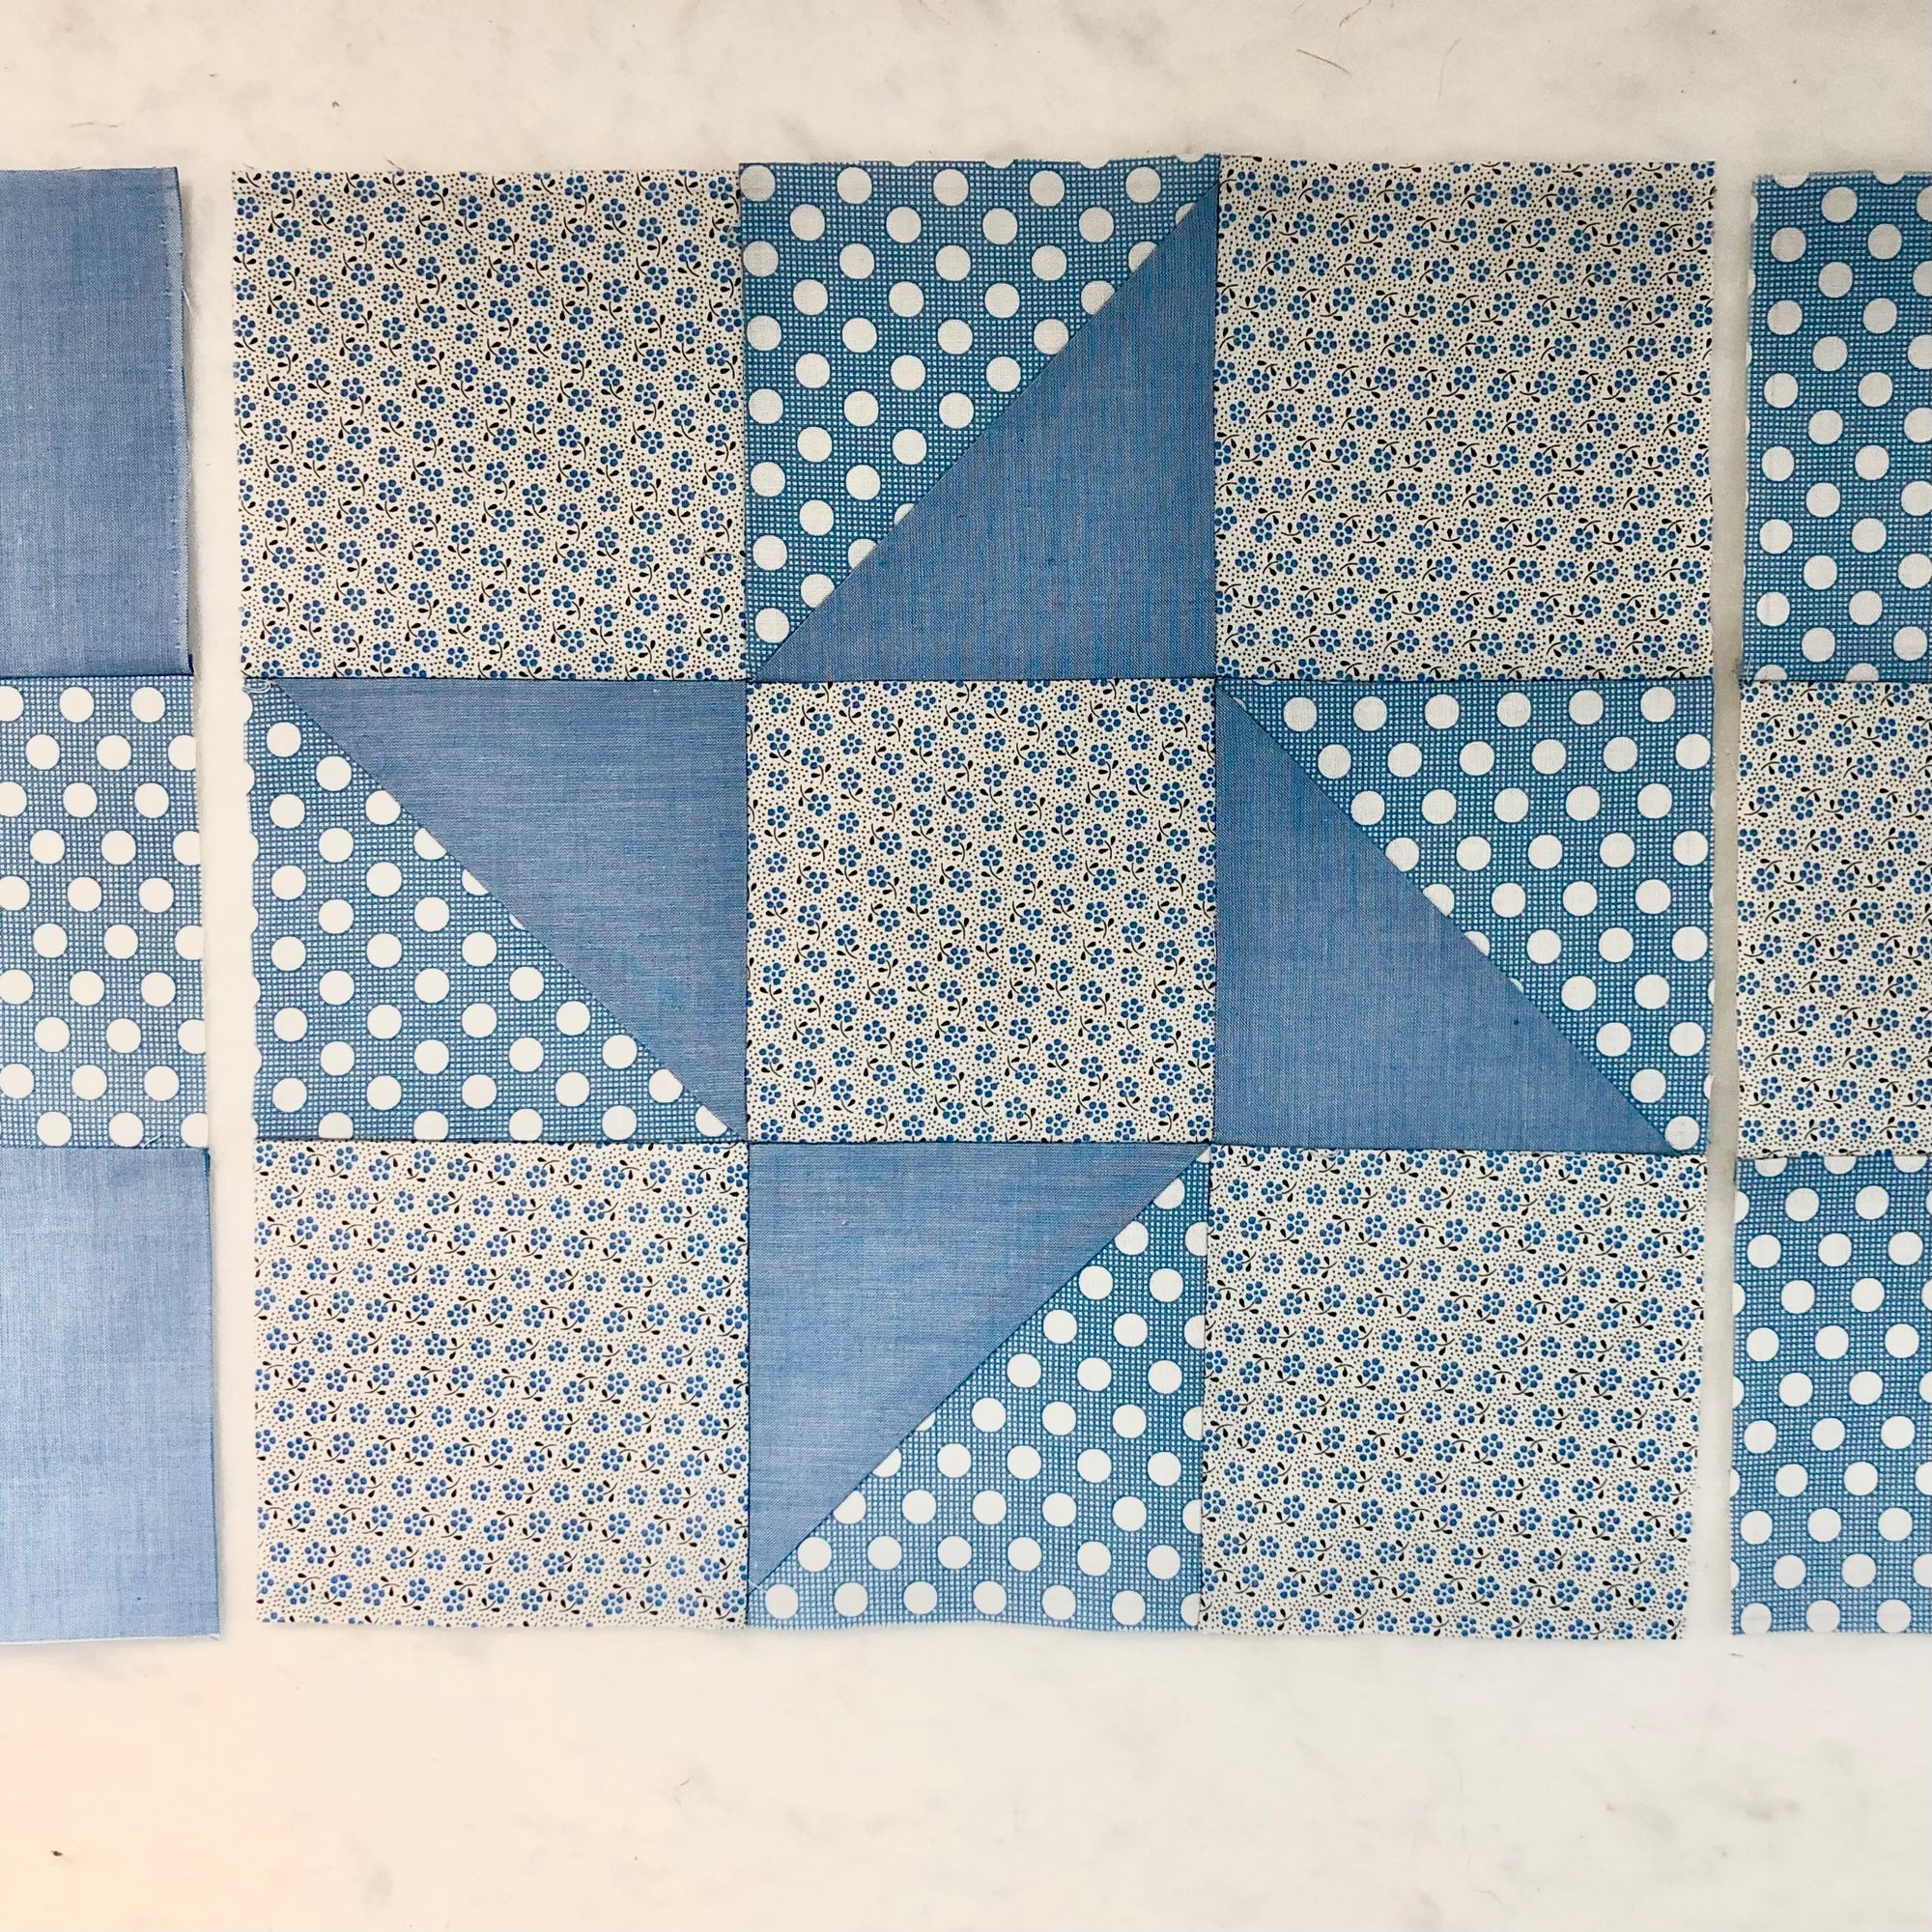 Learn to Make a Quilt by Hand - begins April 27 10am - 12pm